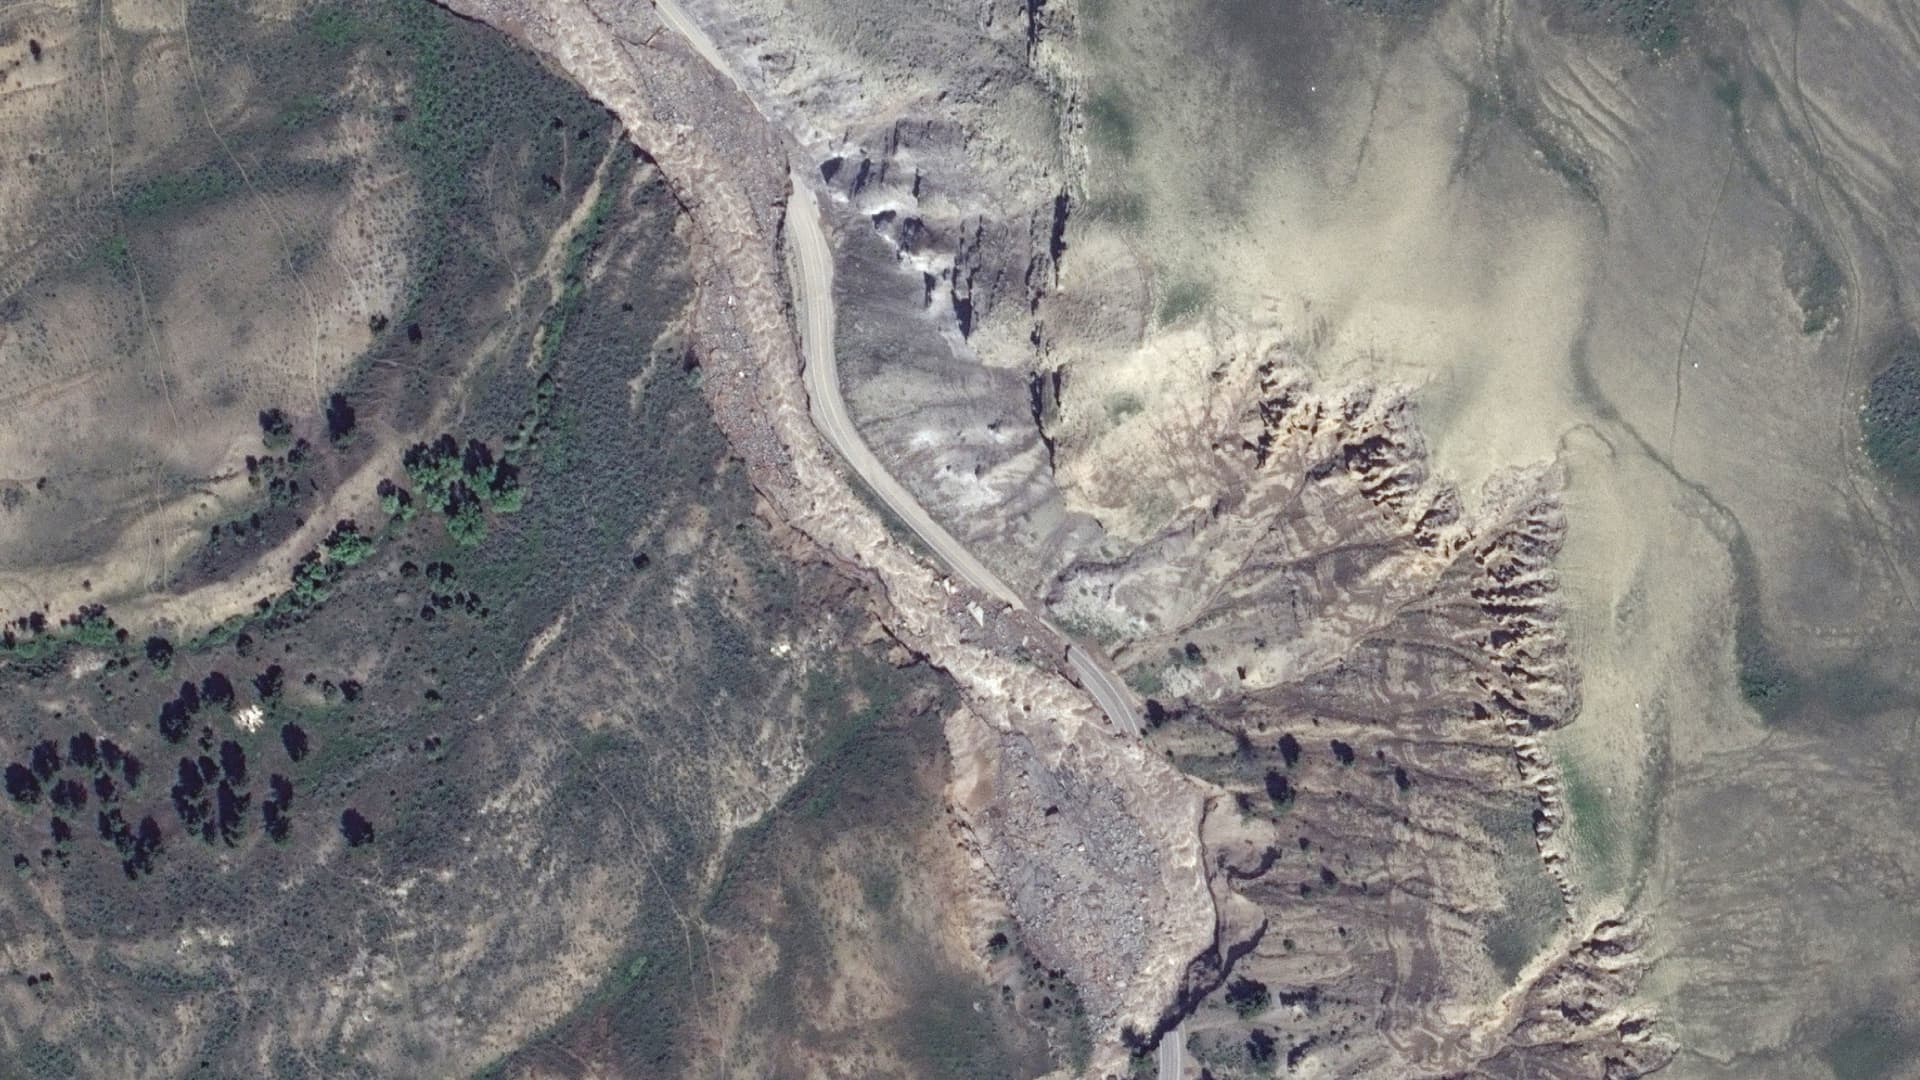 A satellite image shows an overview of road washouts south of Yellowstone National Park north entrance, Montana, U.S. June 15, 2022.